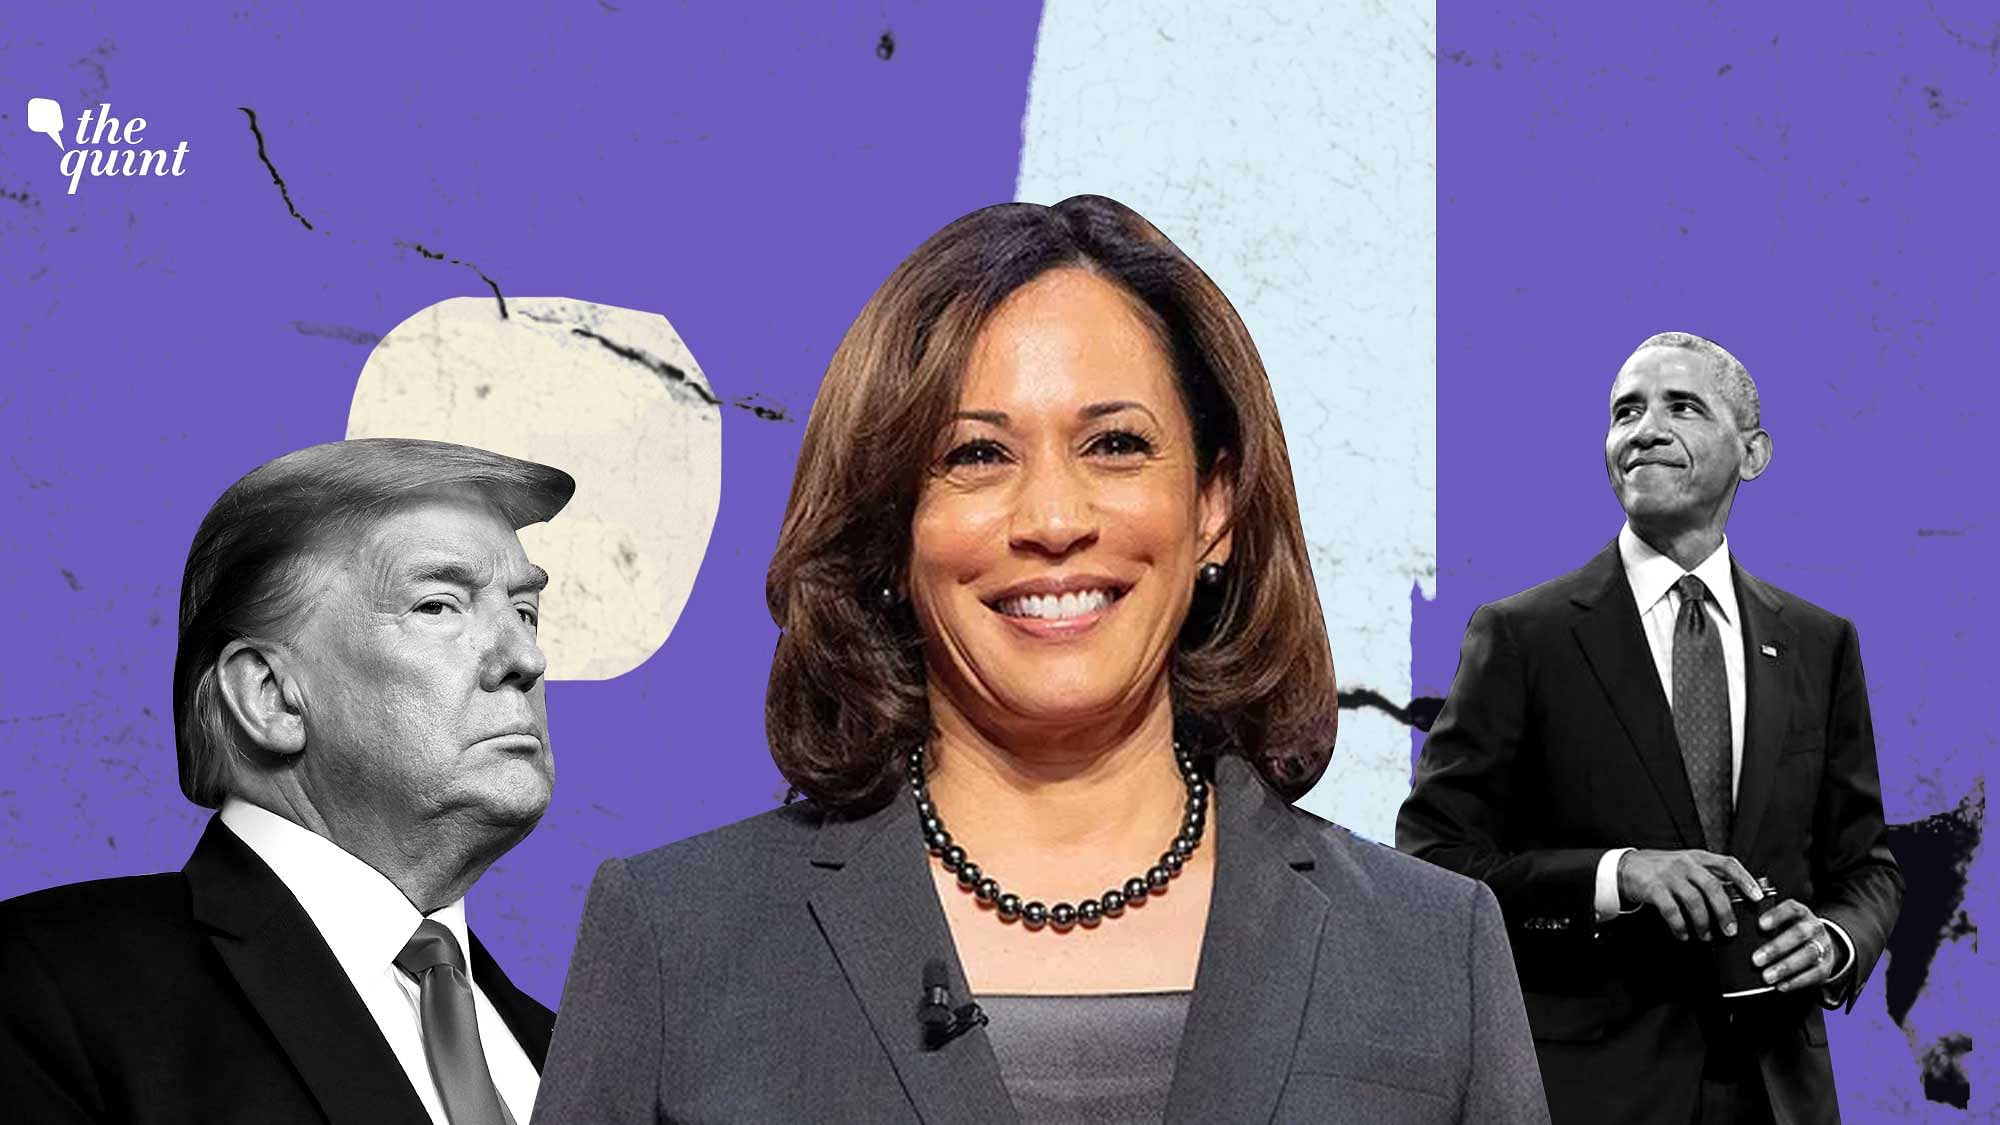 Last week, Donald Trump <a href="https://www.thequint.com/news/world/trump-promotes-false-claim-about-harris-not-being-a-us-citizen">stoked rumours</a> that questioned Kamala Harris’ eligibility to be America’s Vice-President, based on her parents’ immigration status at the time of her birth.